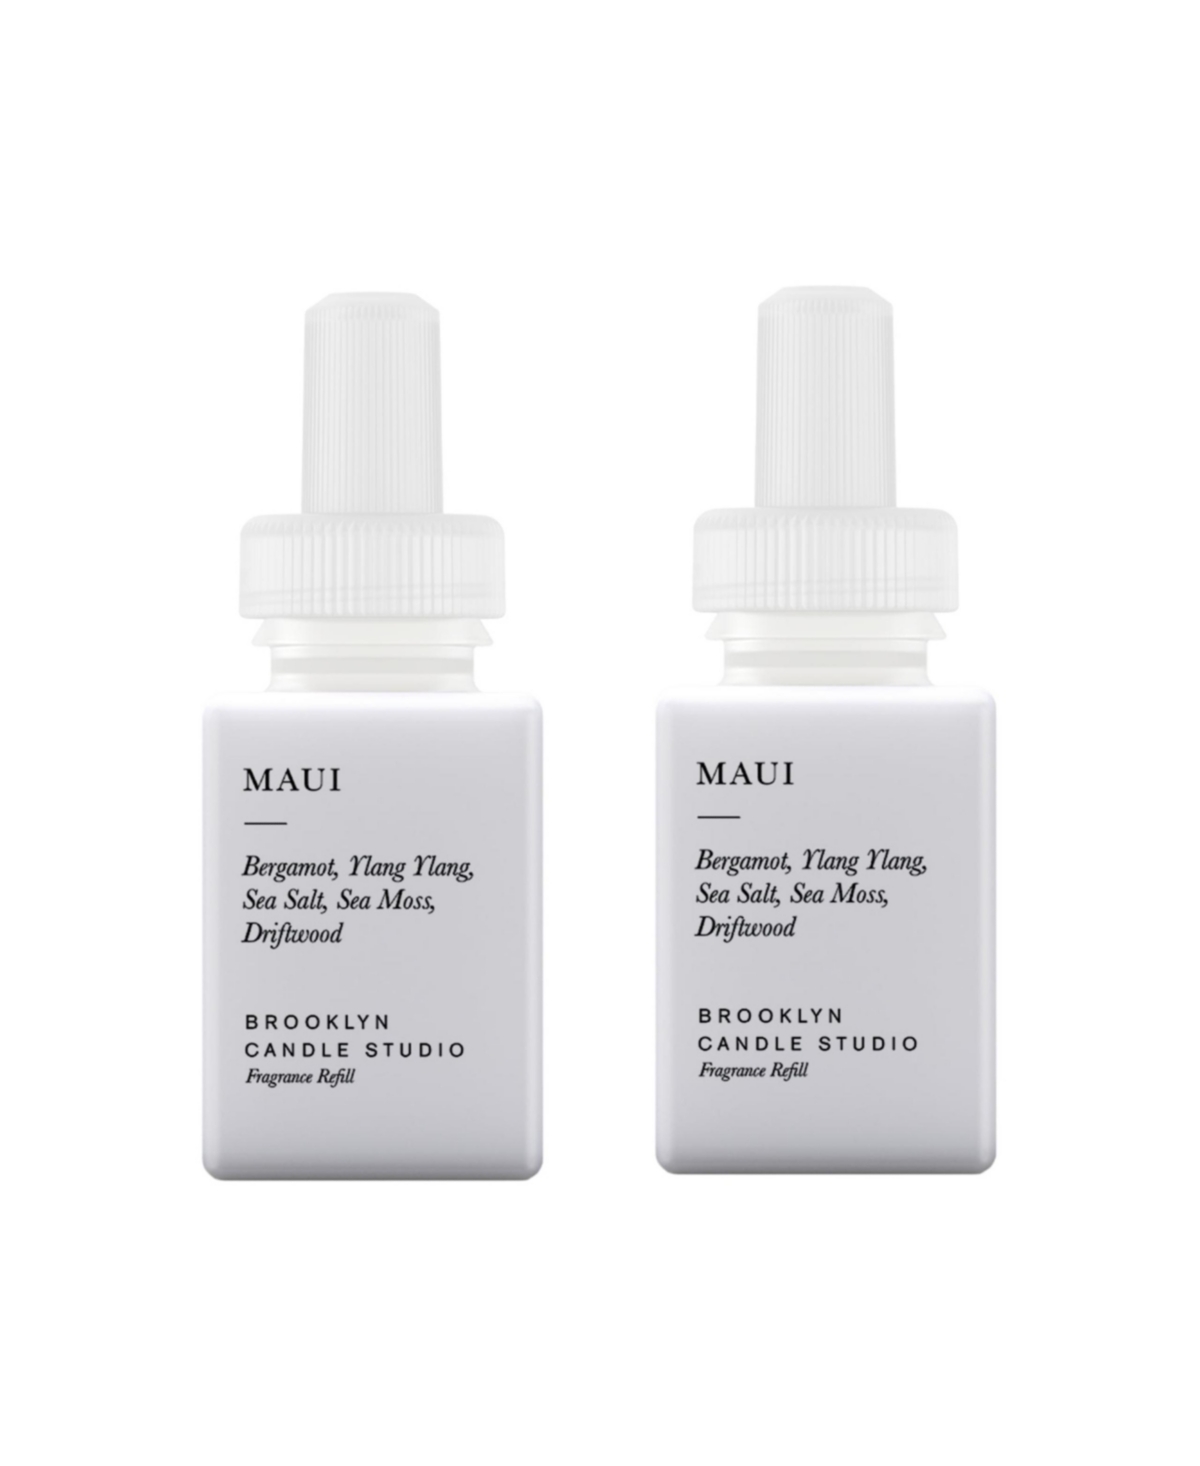 Brooklyn Candle Studio - Maui - Home Scent Refill - Smart Home Air Diffuser Fragrance - Up to 120-Hours of Luxury Fragrance per Vial - Clean & Sa